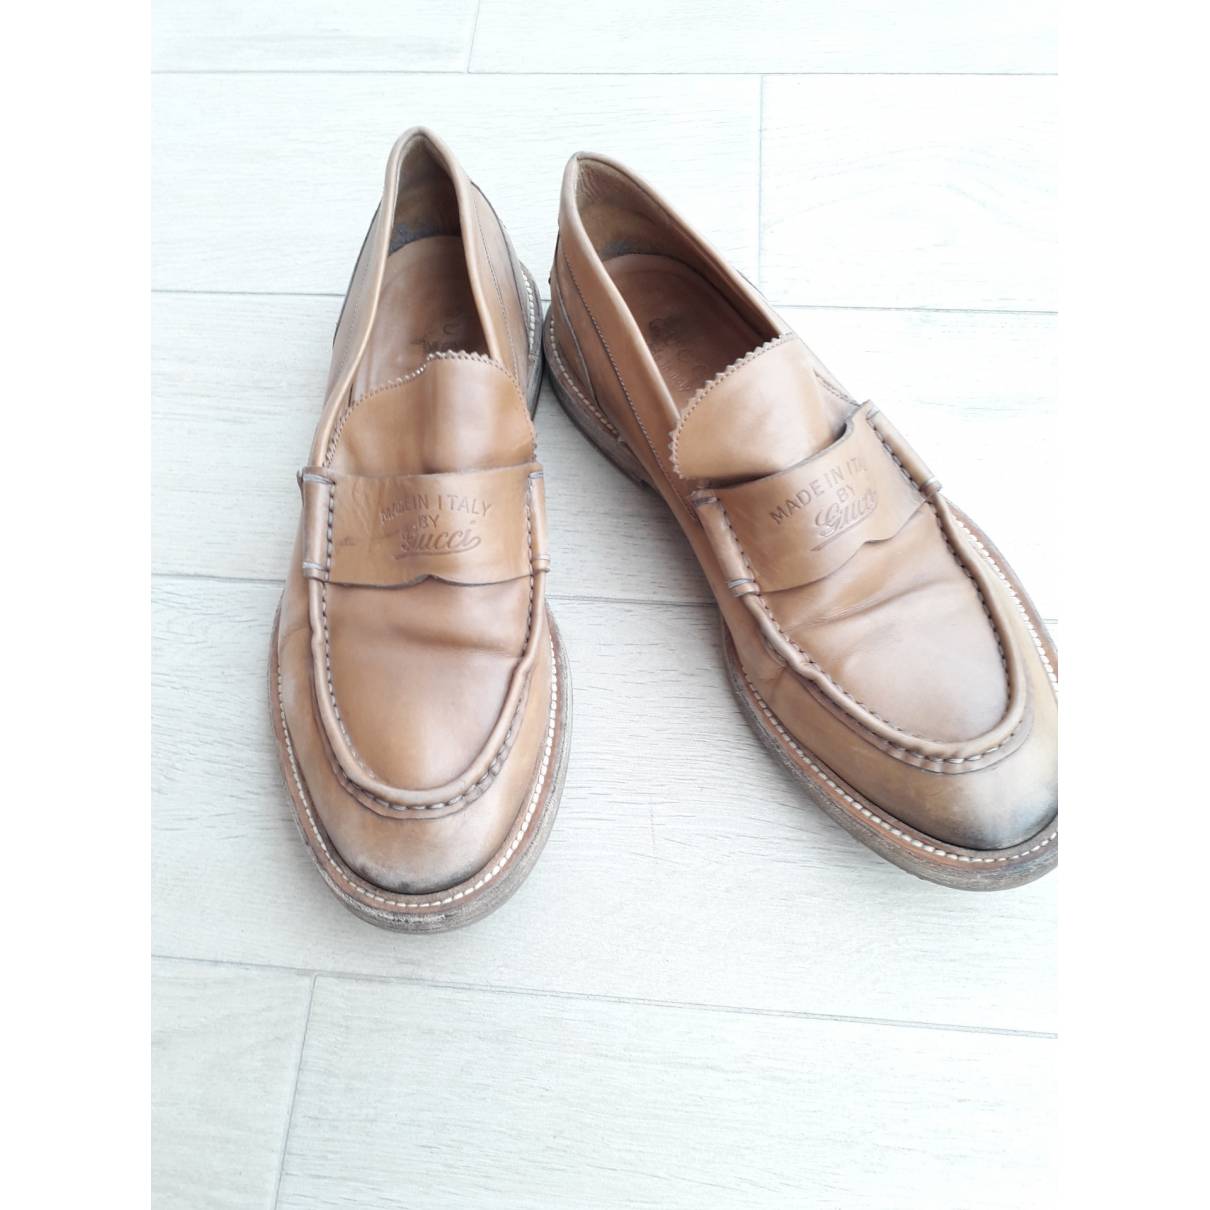 Gucci Leather flats for sale - Vintage